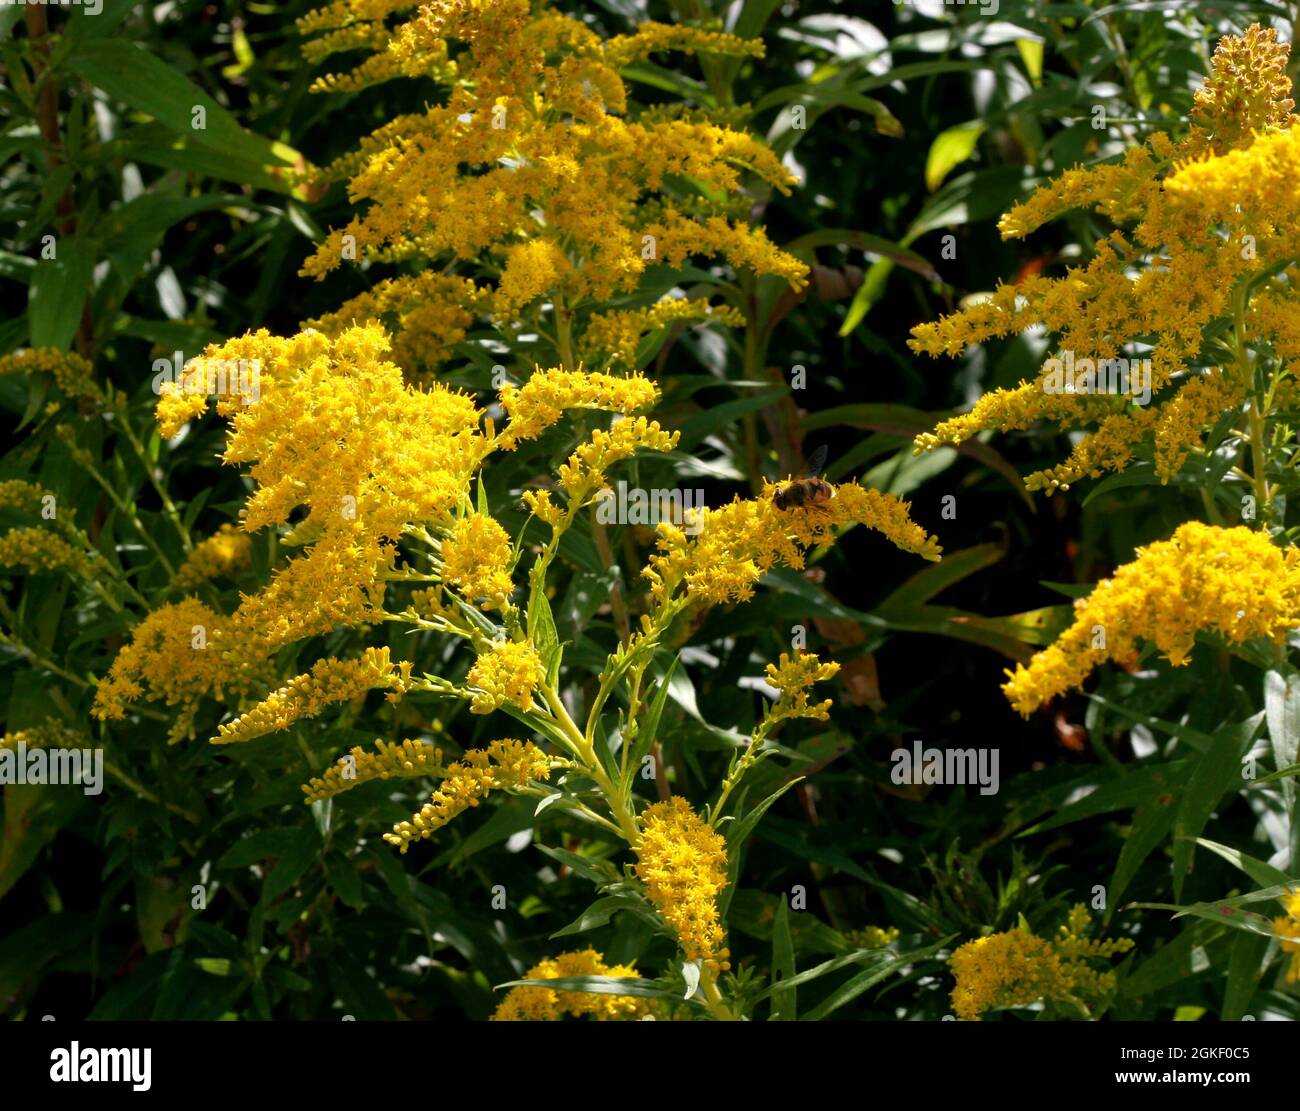 Goldenrod flowers close-up being visited by honey bee Stock Photo